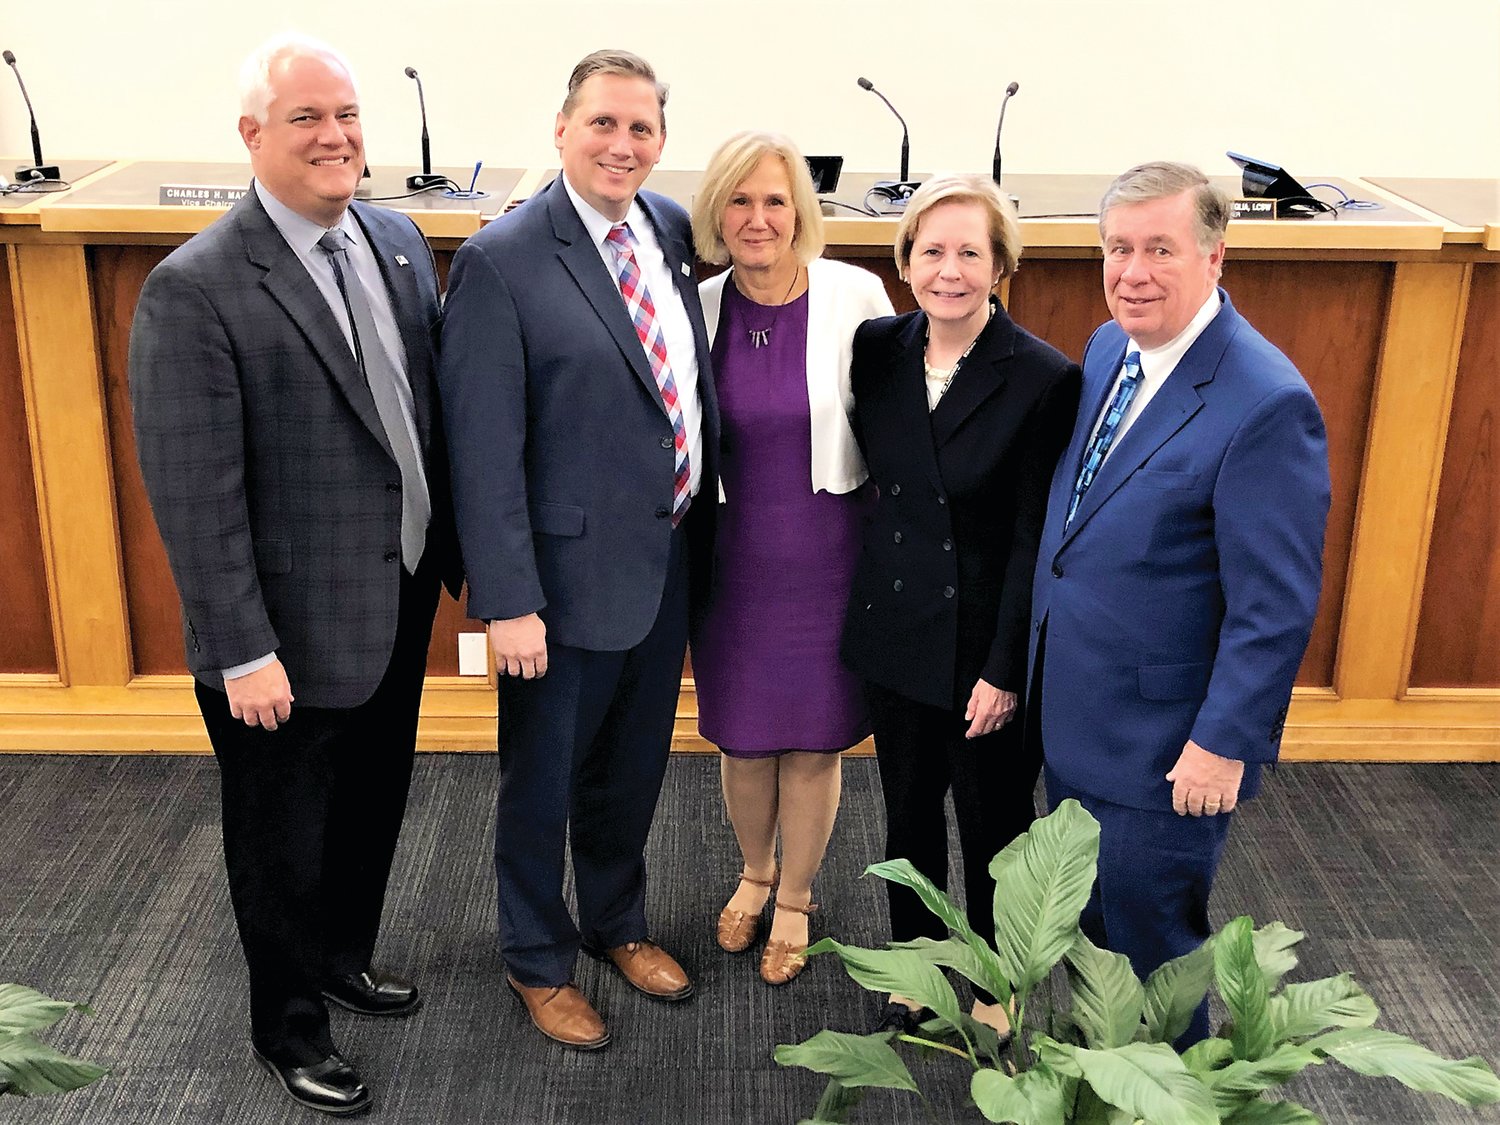 Presiding over Adoption Day were, from left, District Attorney Matt Weintraub,  Clerk of the Orphan’s Court Dom Petrille, Lynne Kallus-Rainey who was honored for long service, Clerk of Courts Mary Smithson, and Judge Robert J. Mellon. Photograph by Larry King.